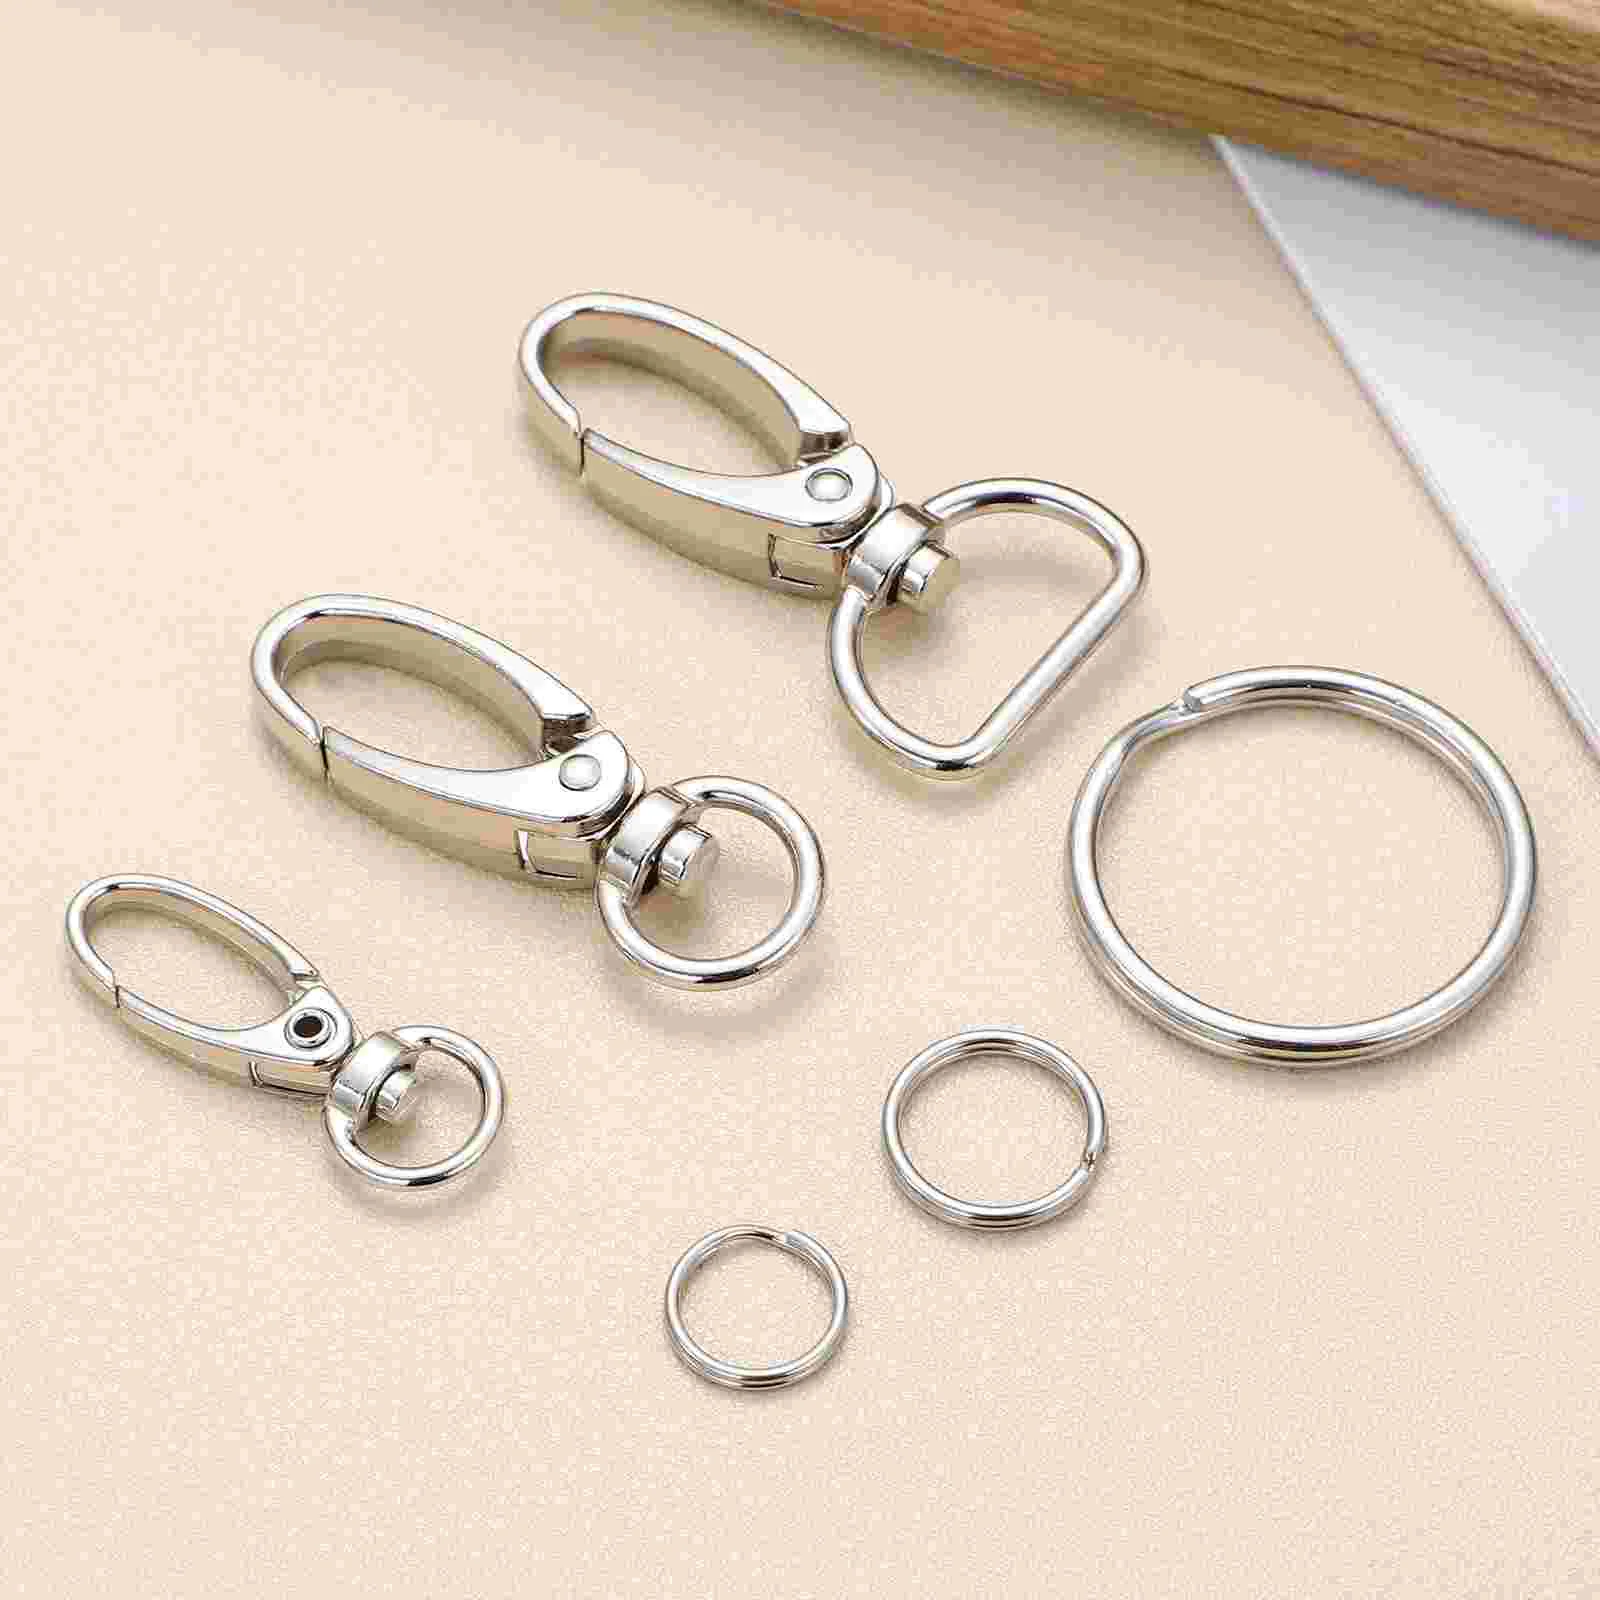 Zinc Alloy Dog Collar Charms Button Tag Clip Belt Holder Small Pet